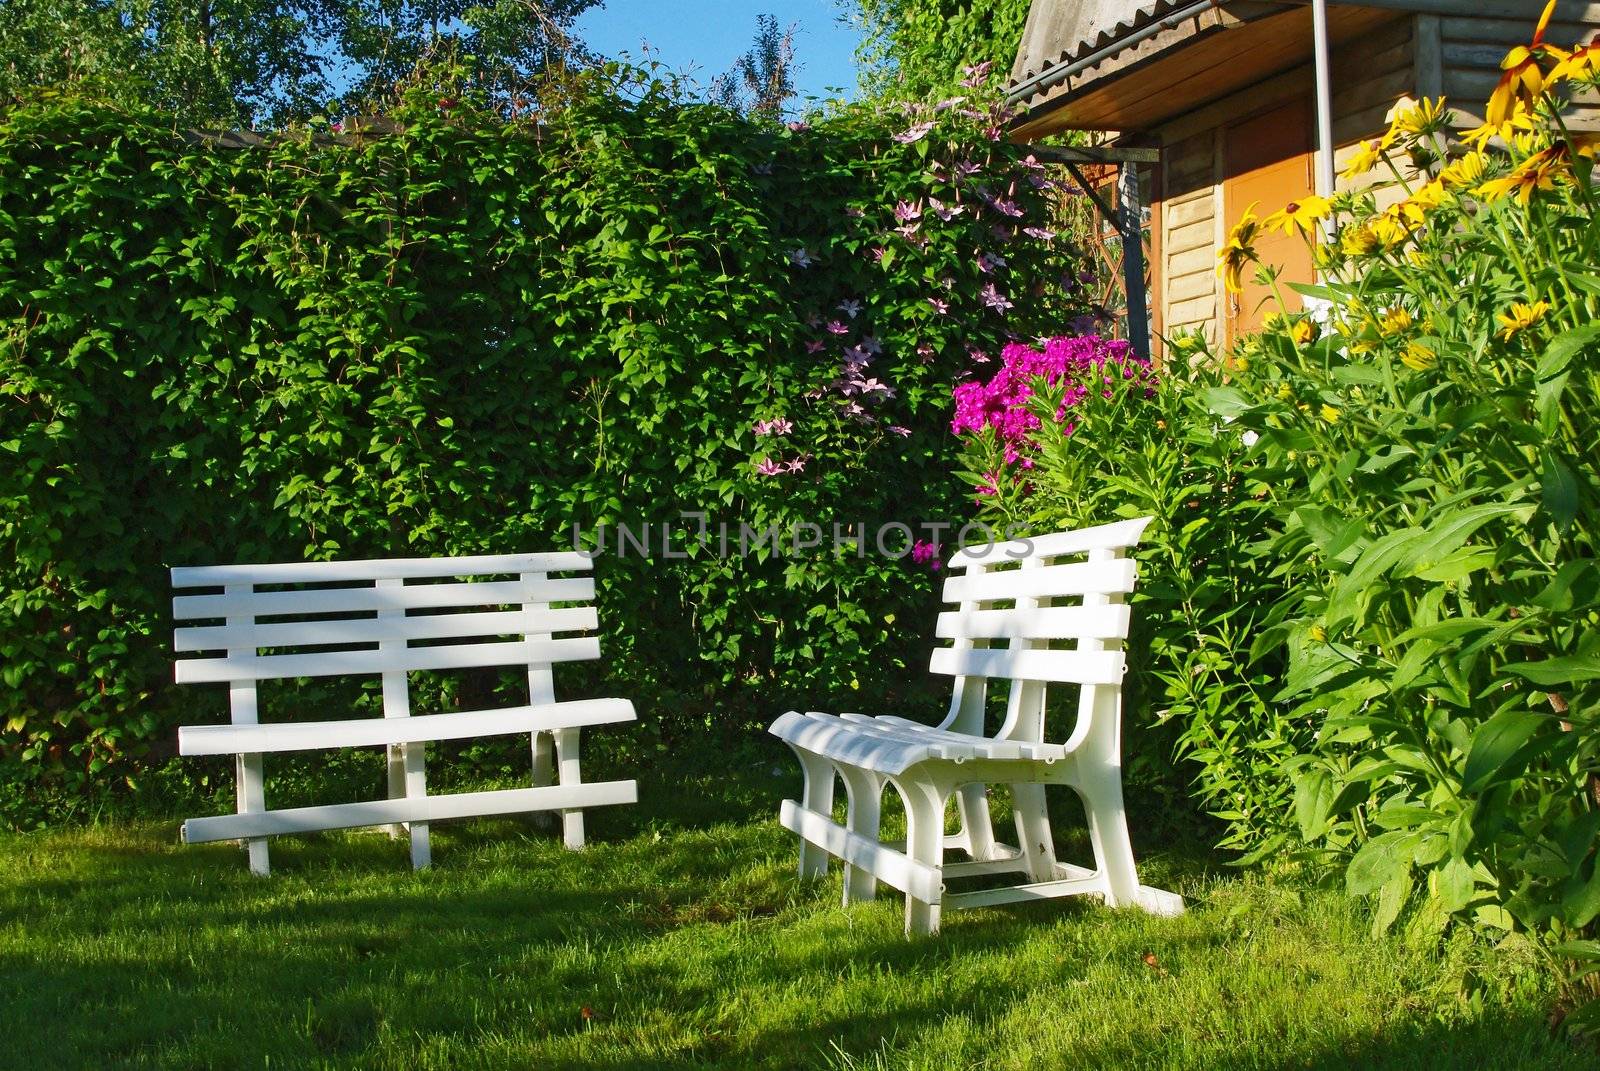 White benches in a secluded corner of lush green garden